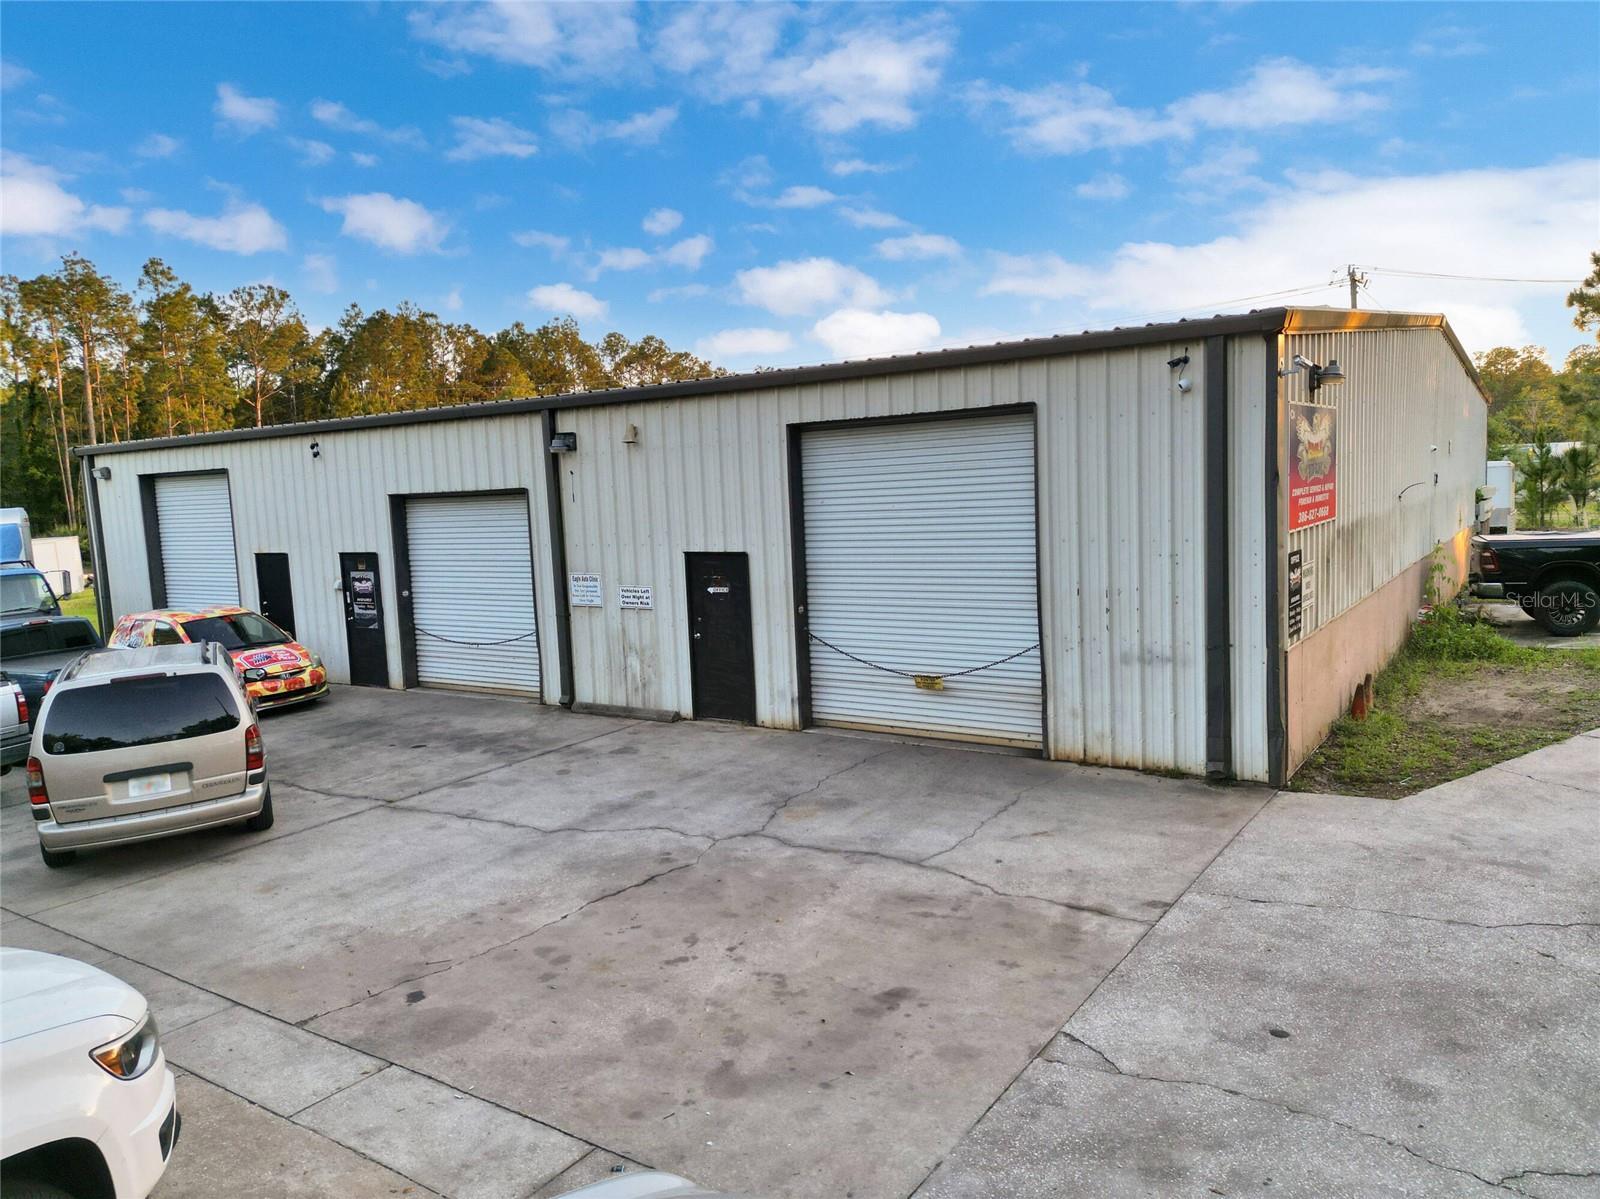 23 HARGROVE GRADE, PALM COAST, Industrial,  for sale, The Mount Dora Group 